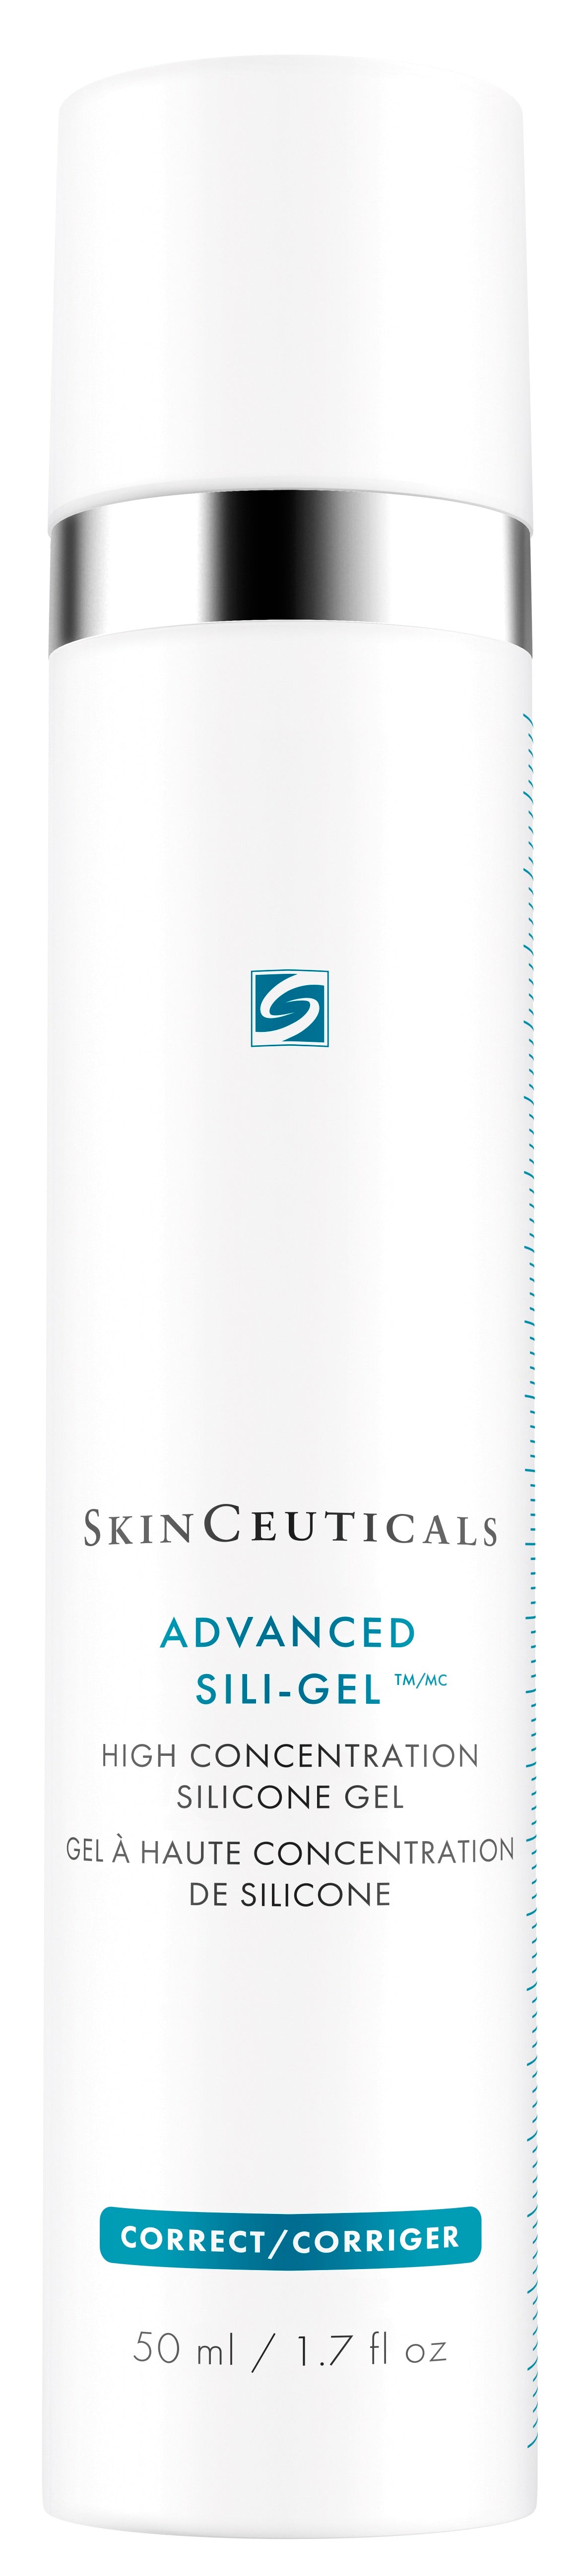 Skinceuticals Advanced Sili-Gel-Accent on Beauty